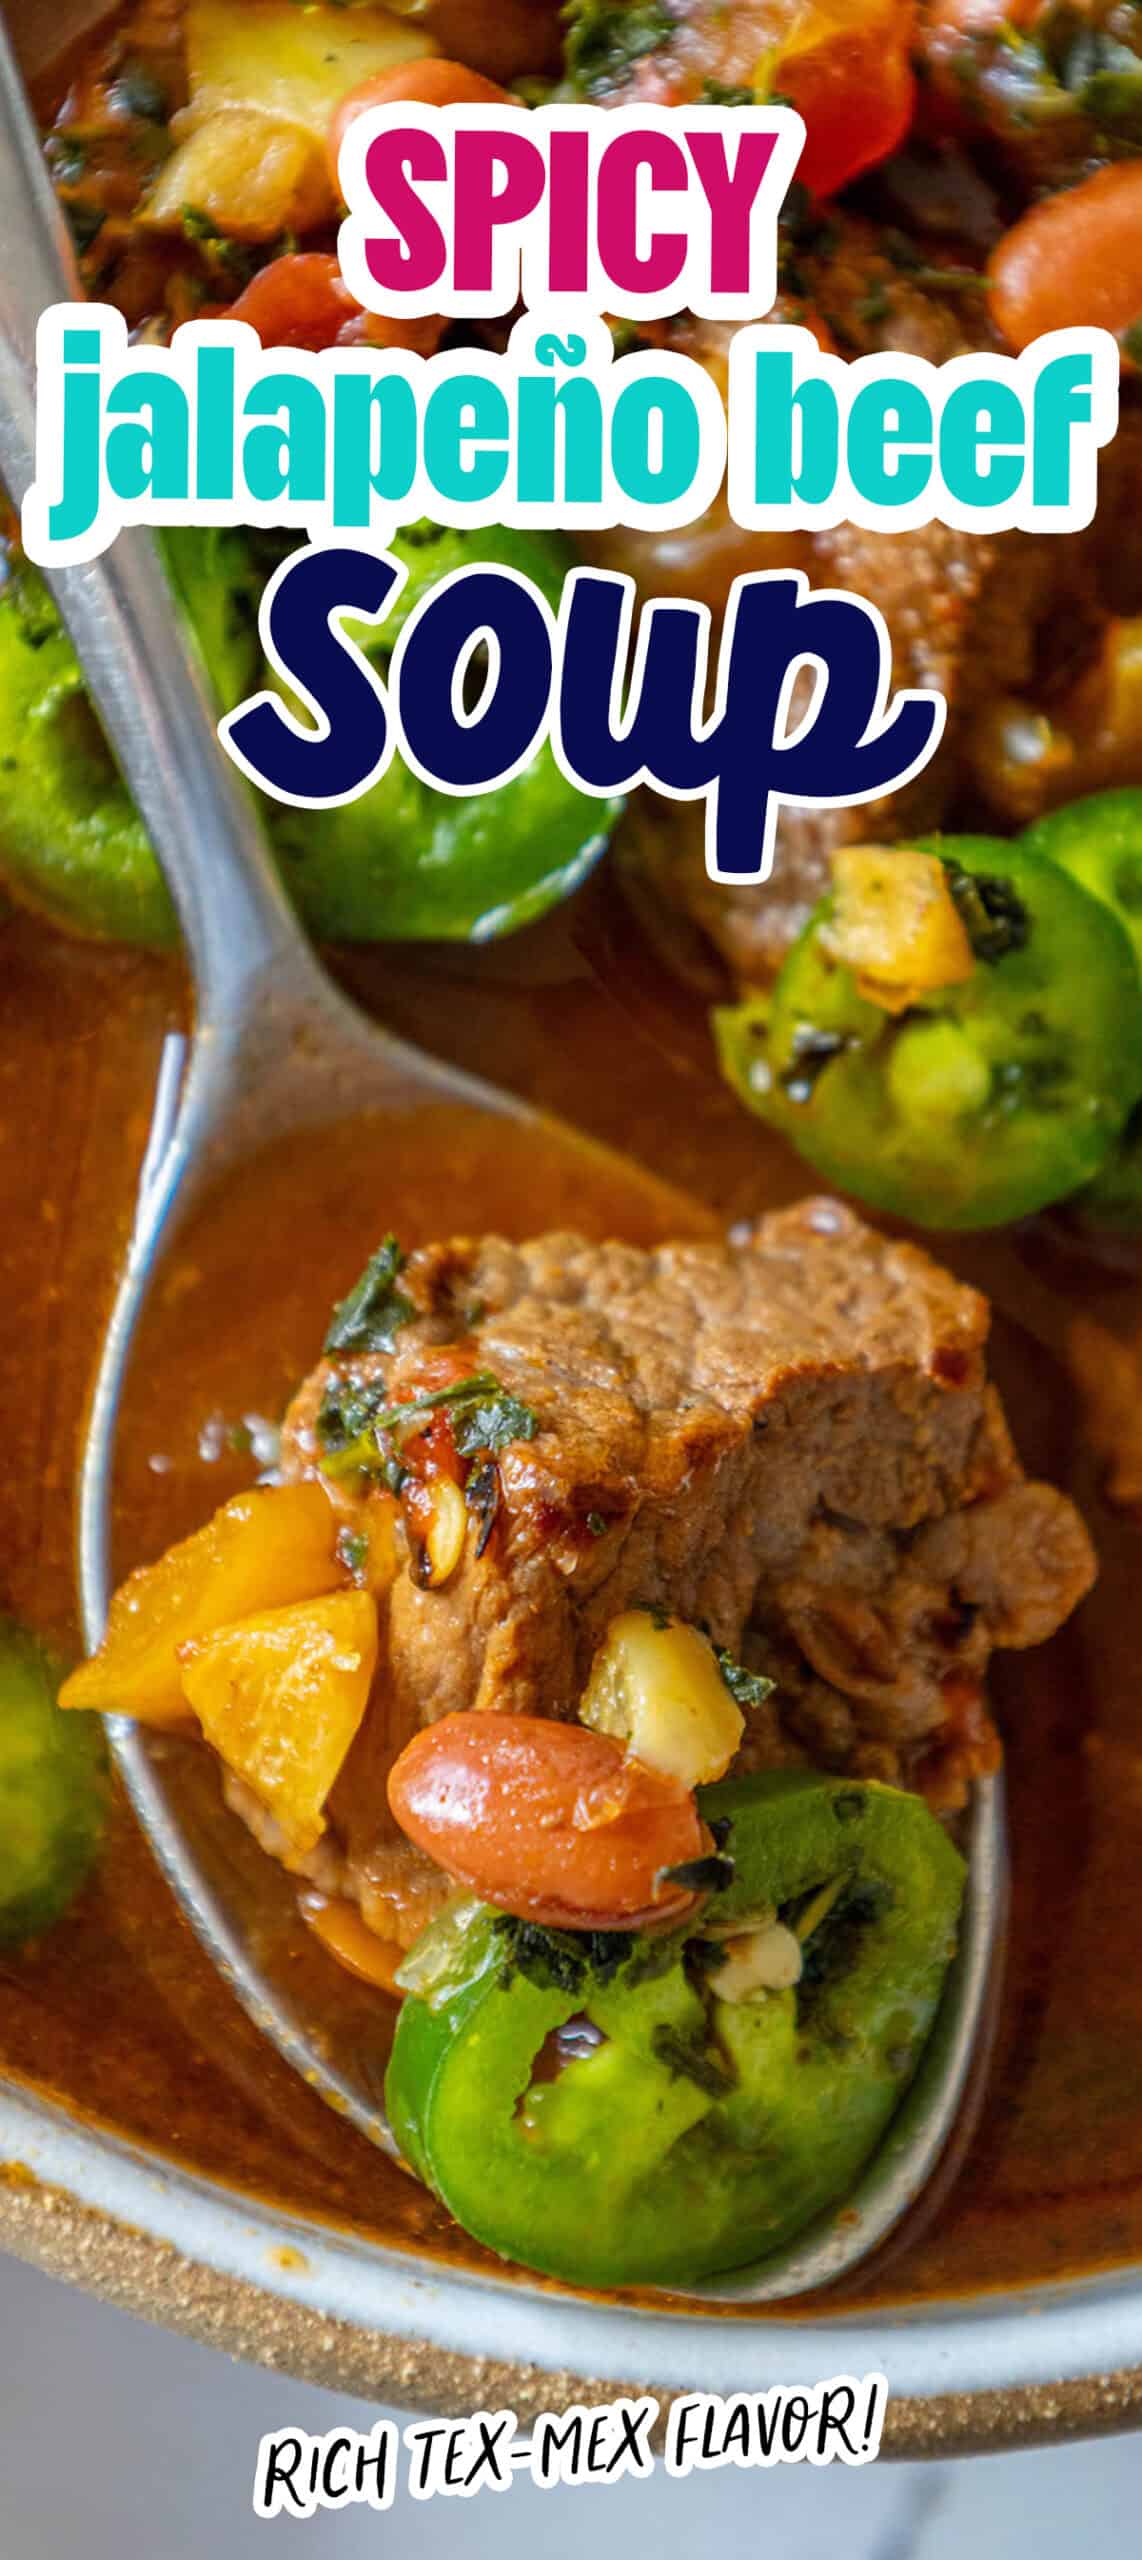 Spicy jalapeo beef soup.